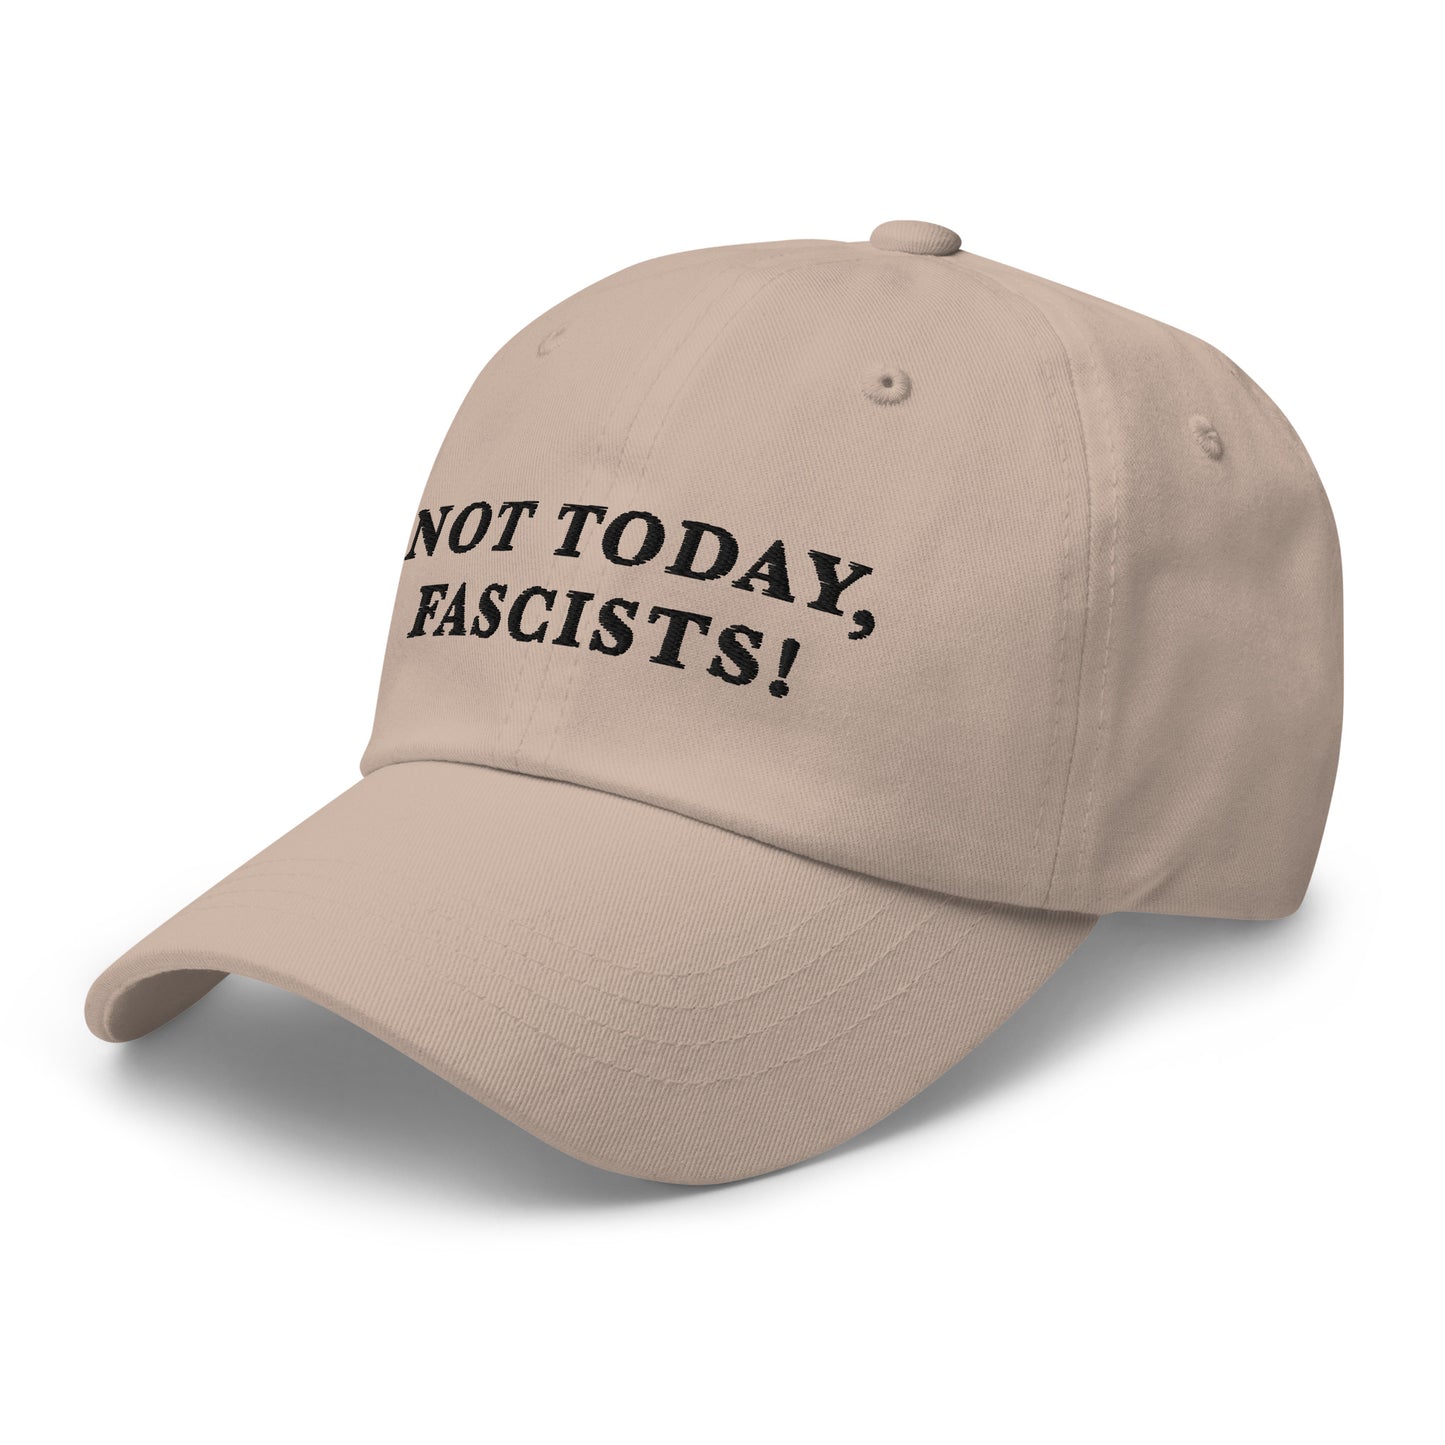 Not Today, Fascists! - Dad hat